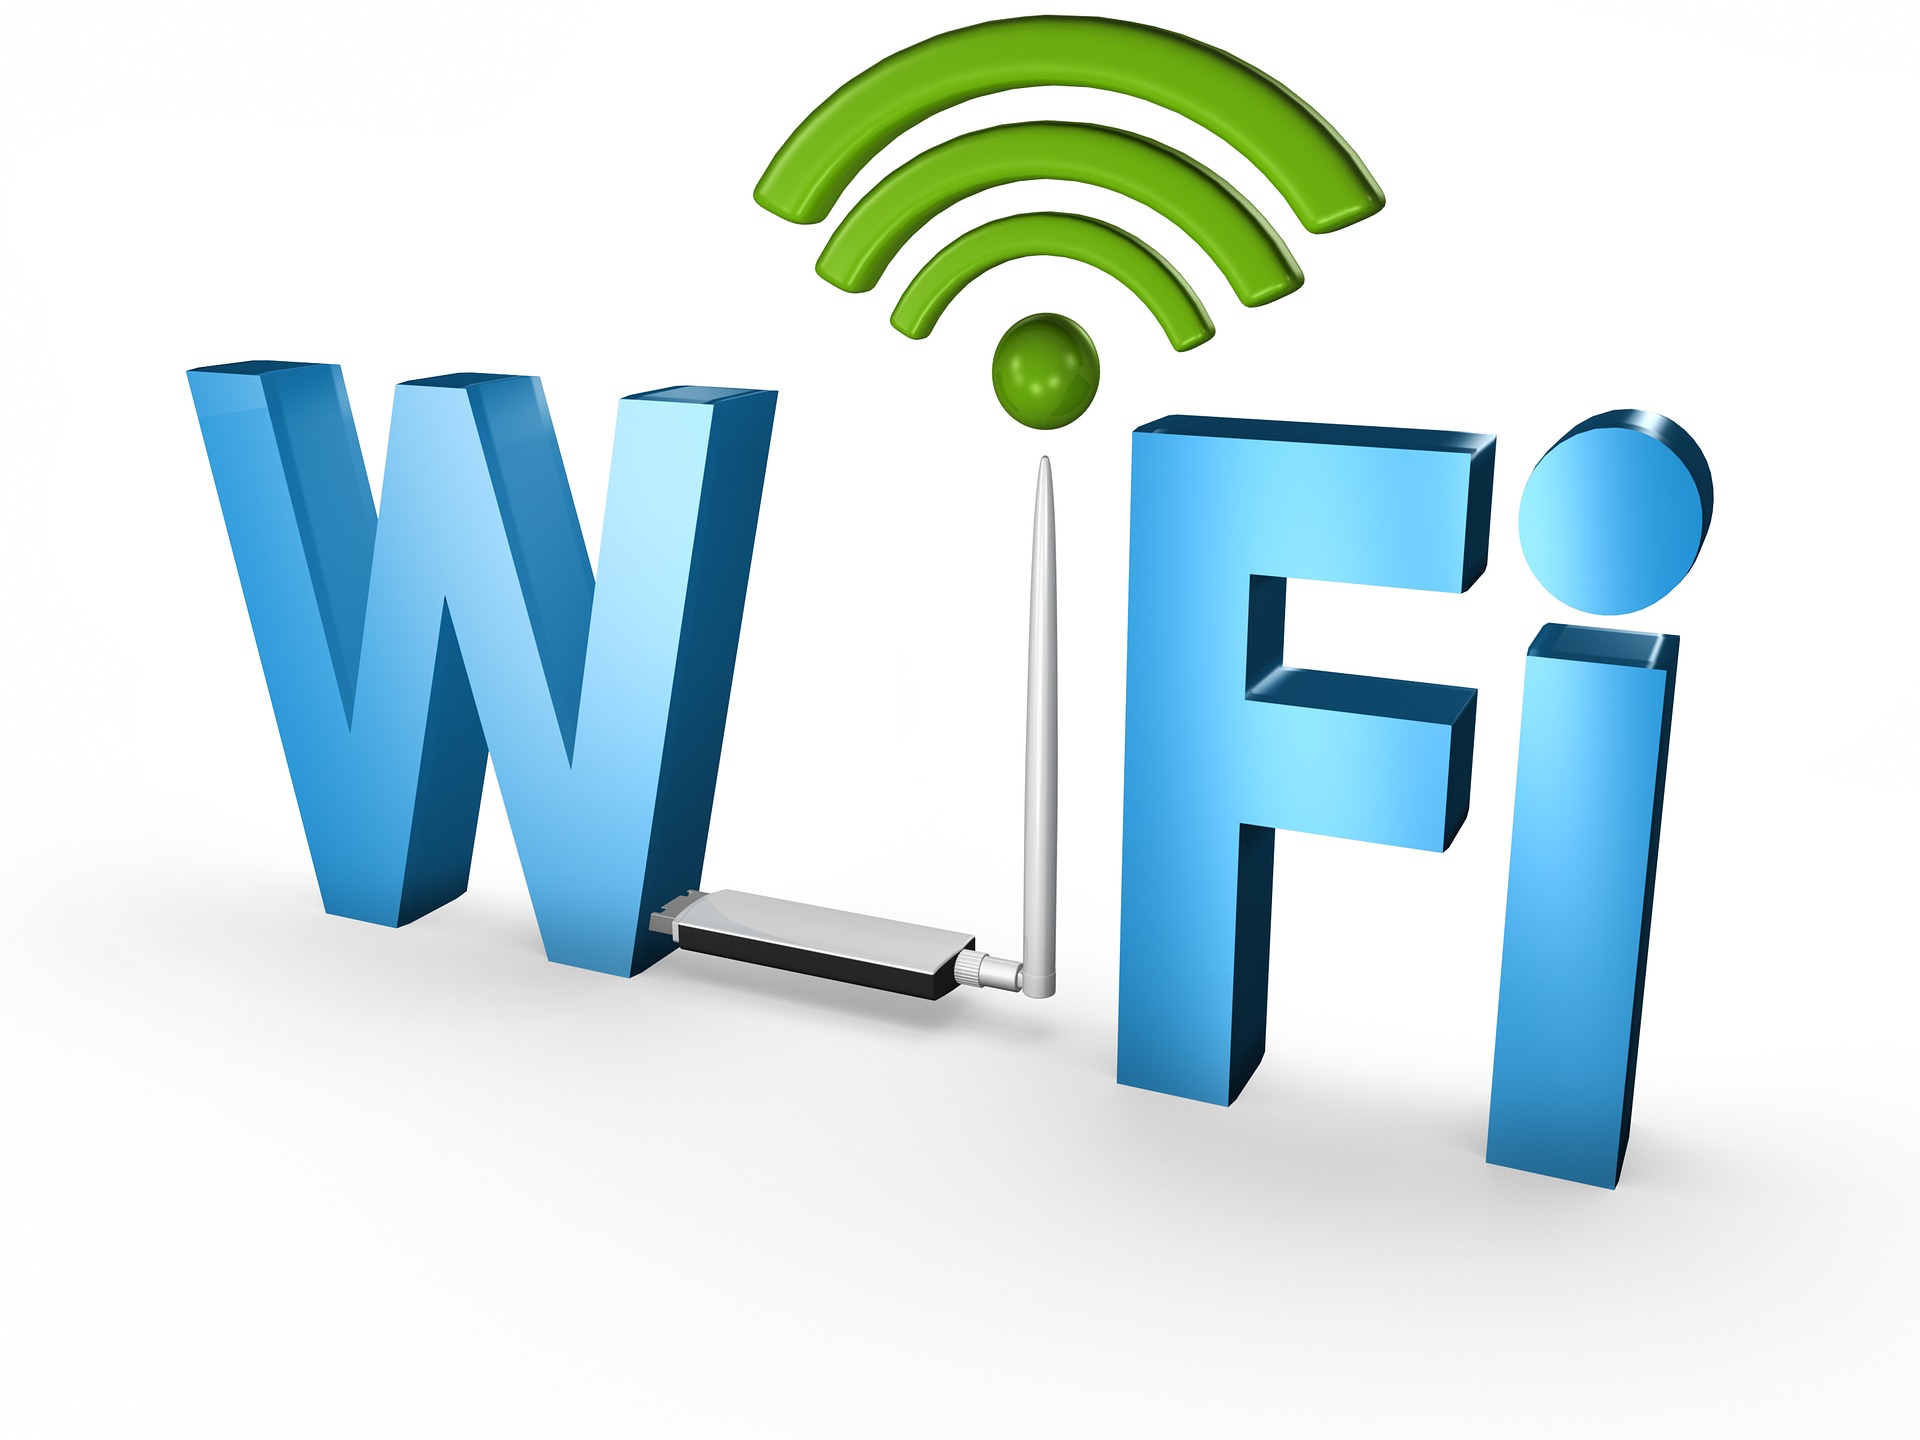 MCPL Boosts Branches’ Exterior Wi-Fi Signals 